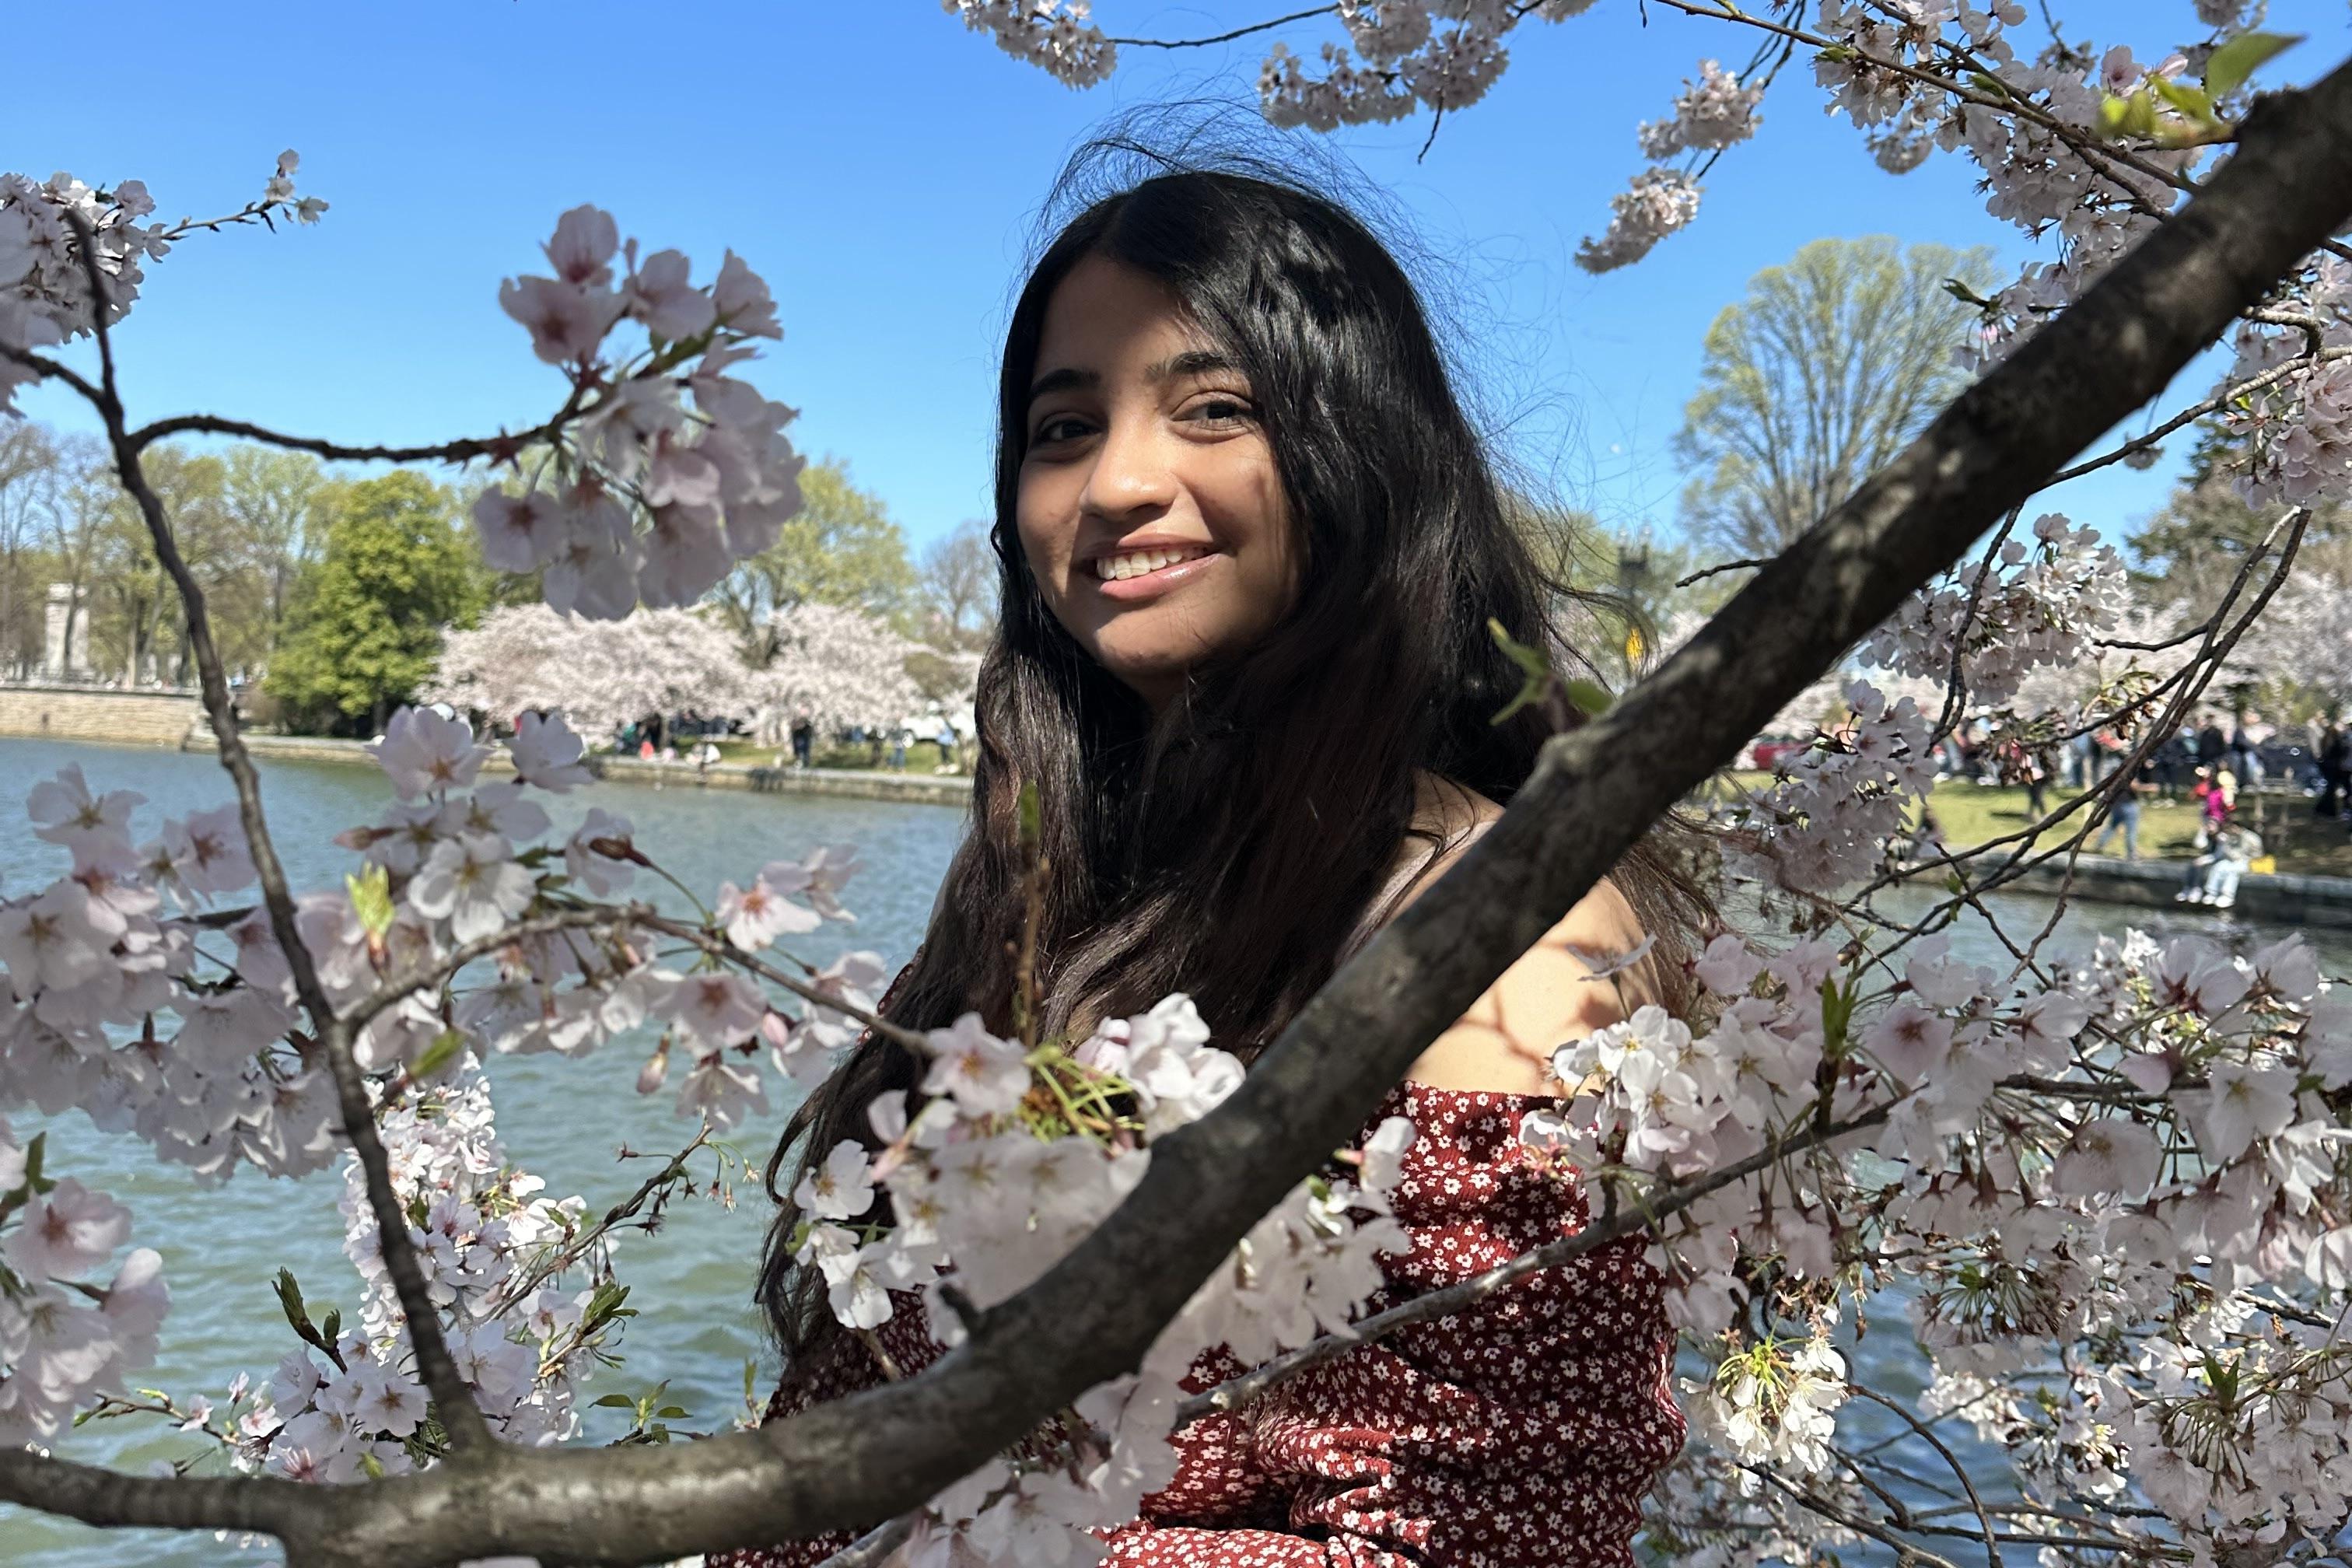 Sadaf stands in front of a cherry blossom branch at the D.C. Tidal Basin.